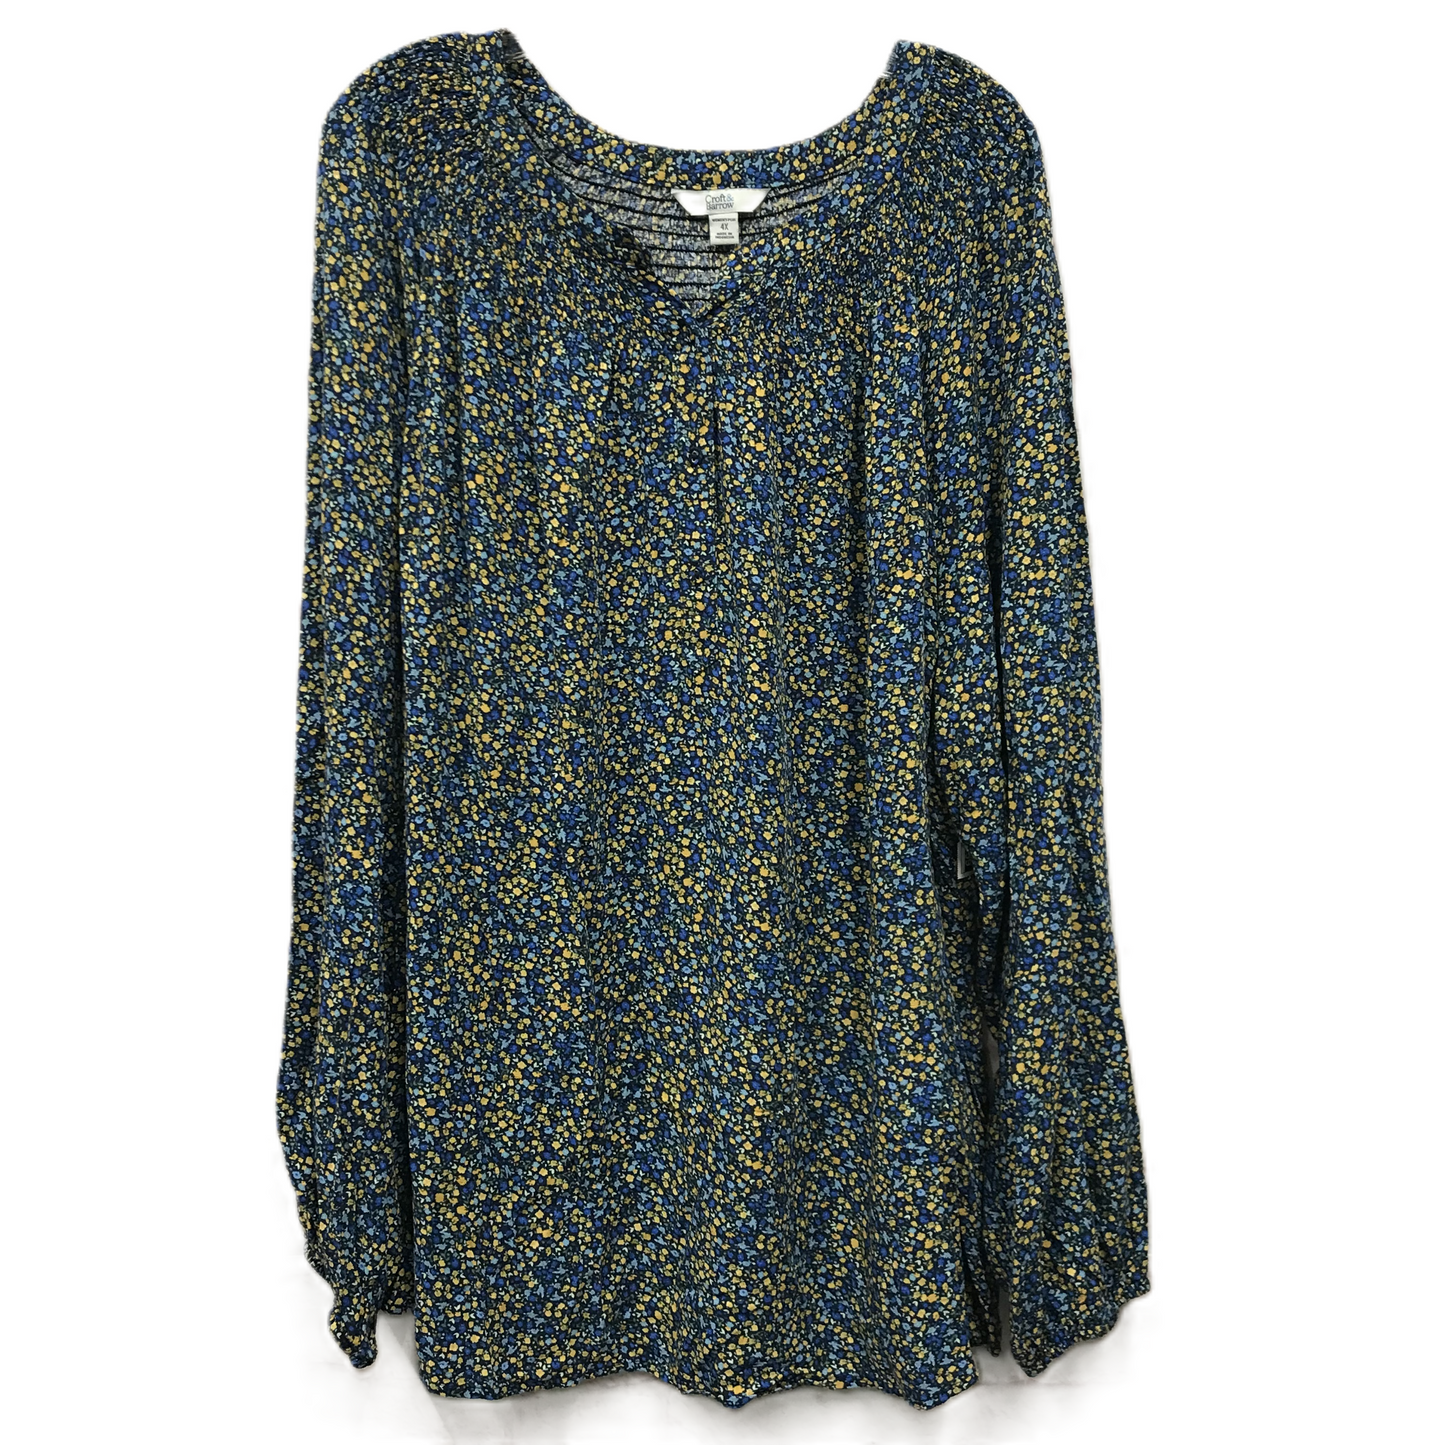 Blue & Yellow Top Long Sleeve By Croft And Barrow, Size: 4x